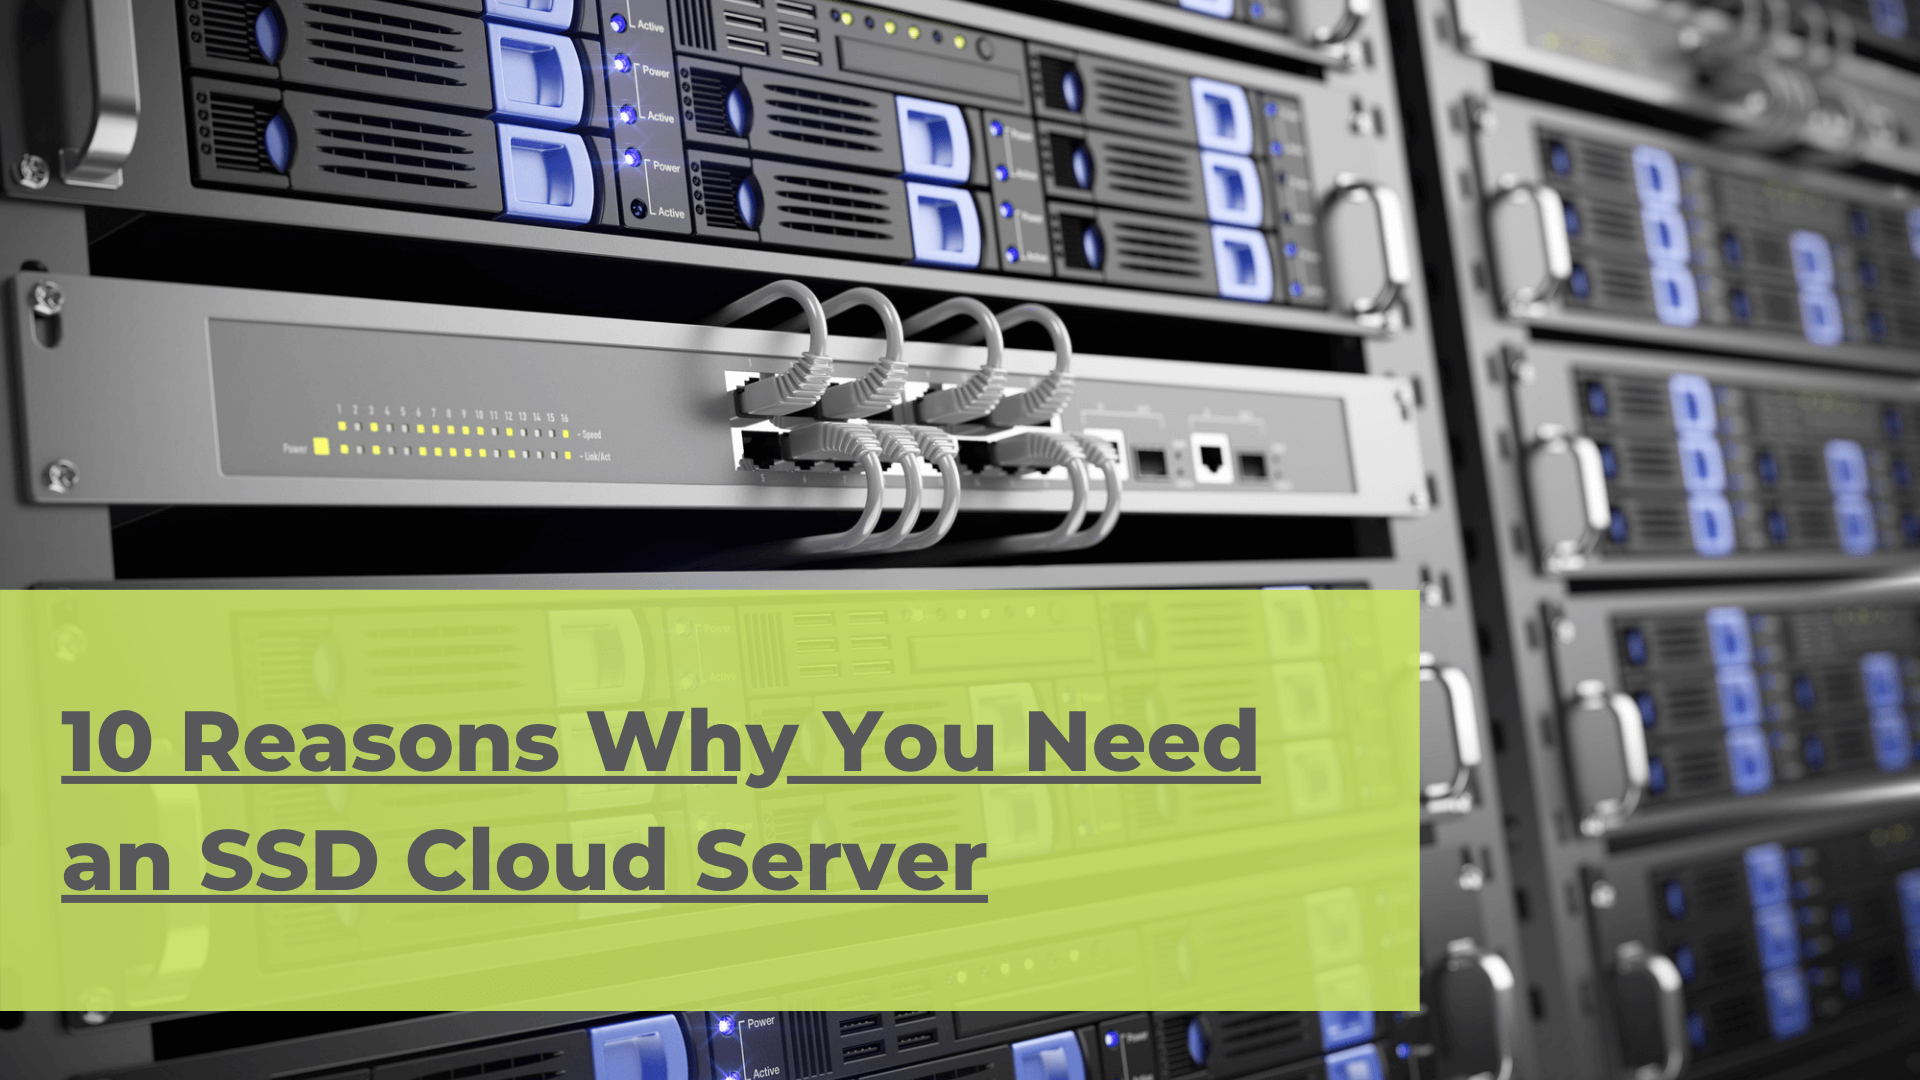 10 Reasons Why You Need an SSD Cloud Server